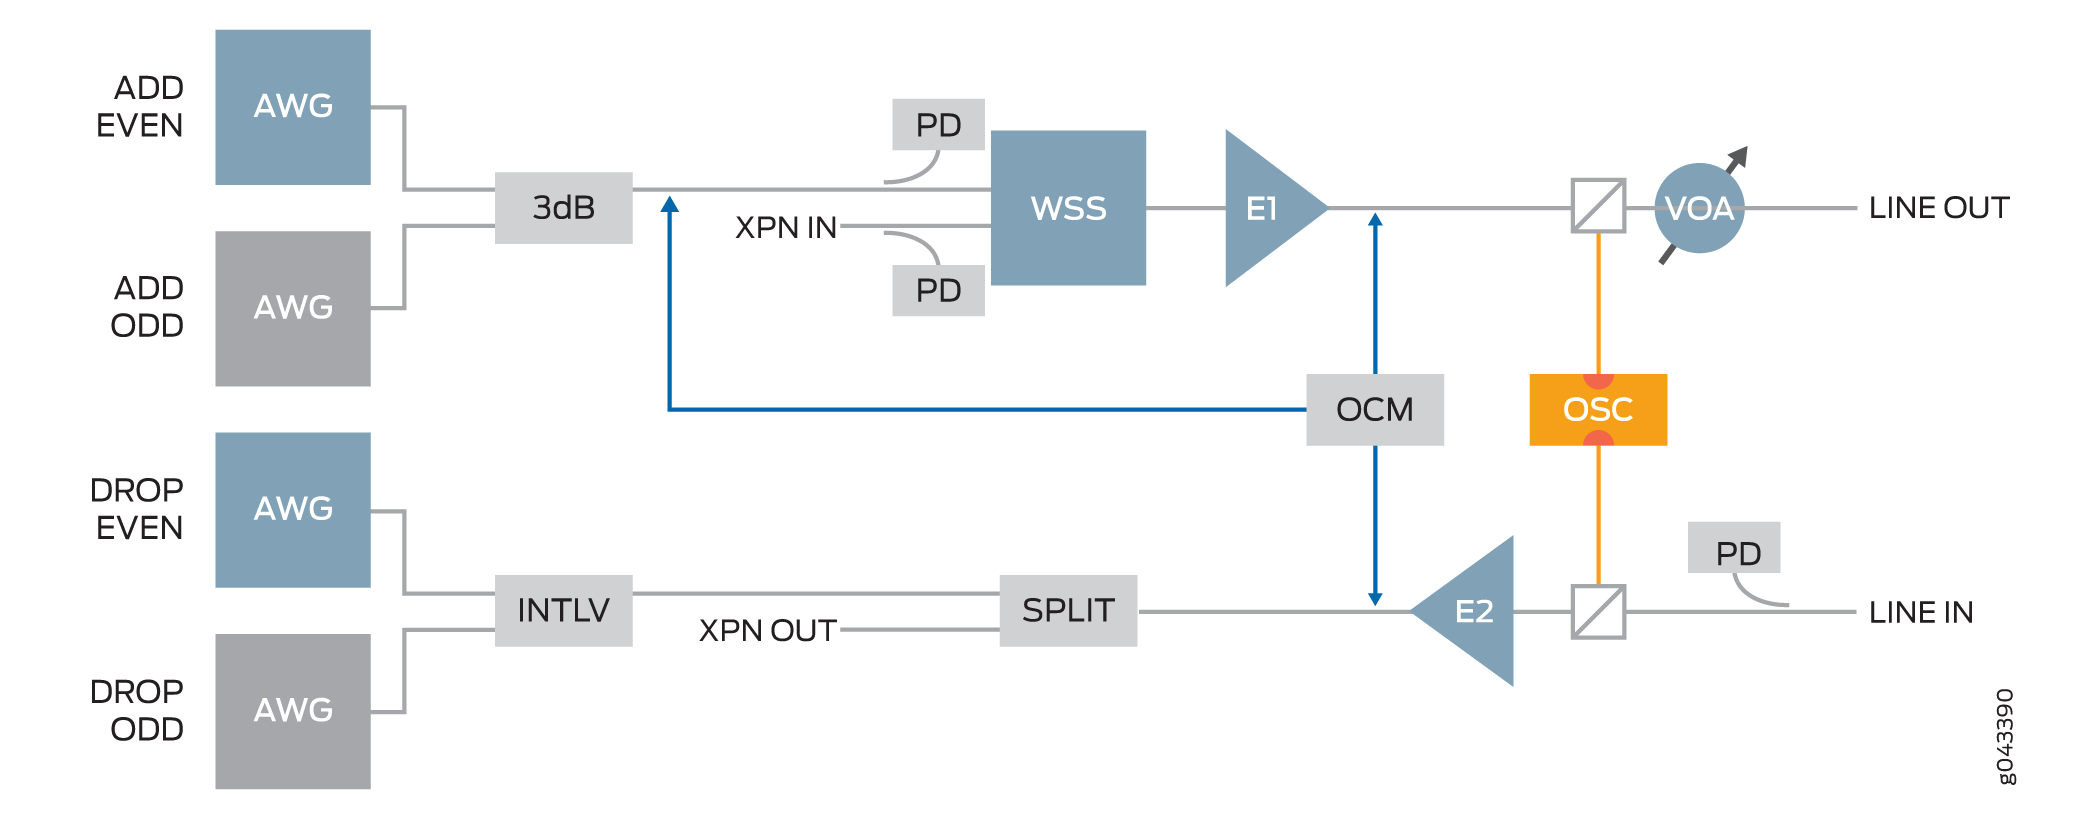 Combined Functions
of the IPLC Base and Expansion Modules